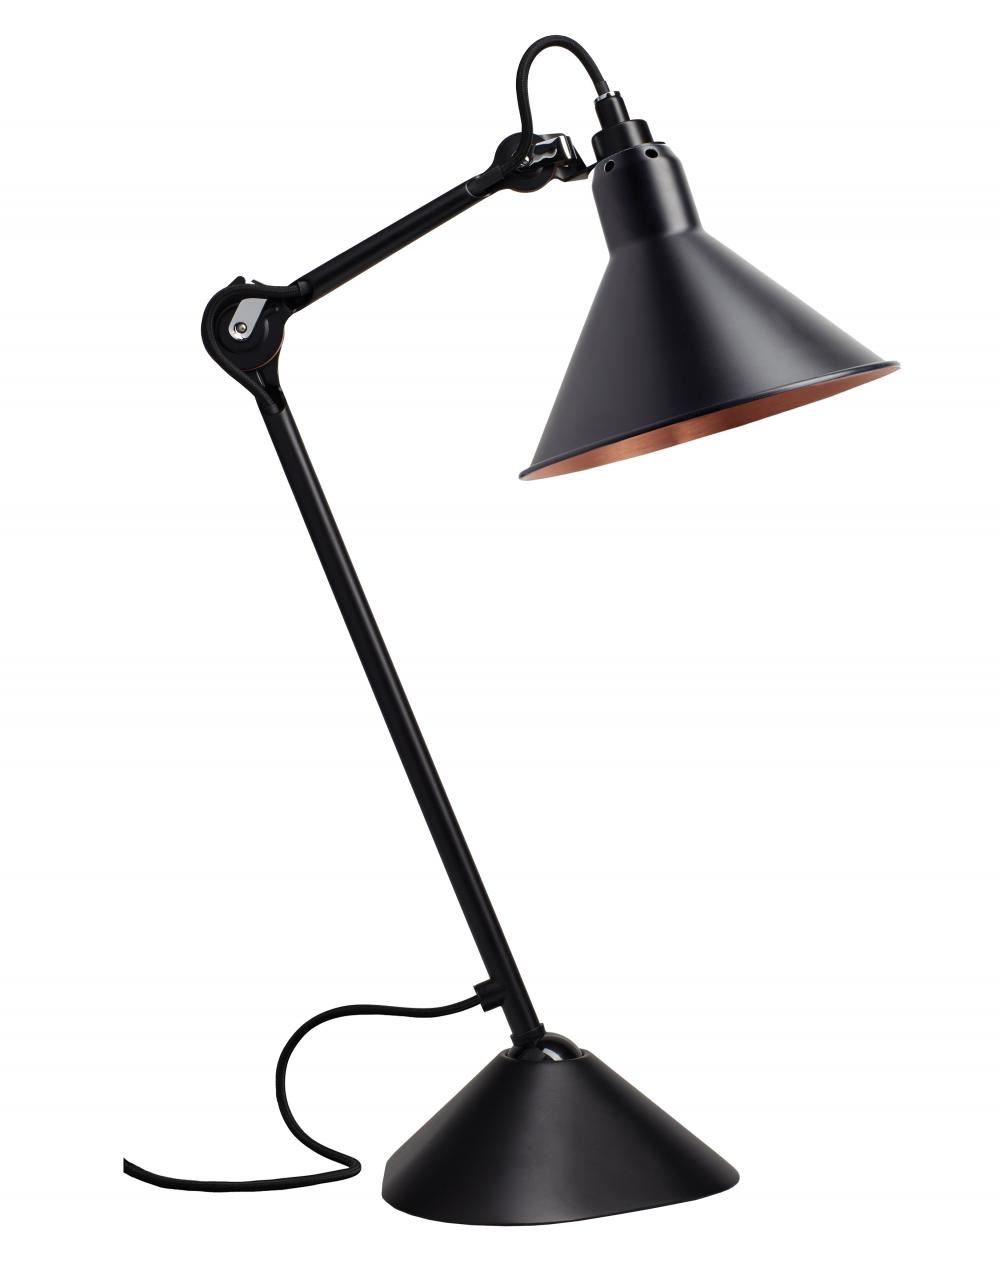 Lampe Gras 205 Table Lamp Satin Black Arm Black Shade With Copper Interior Conic